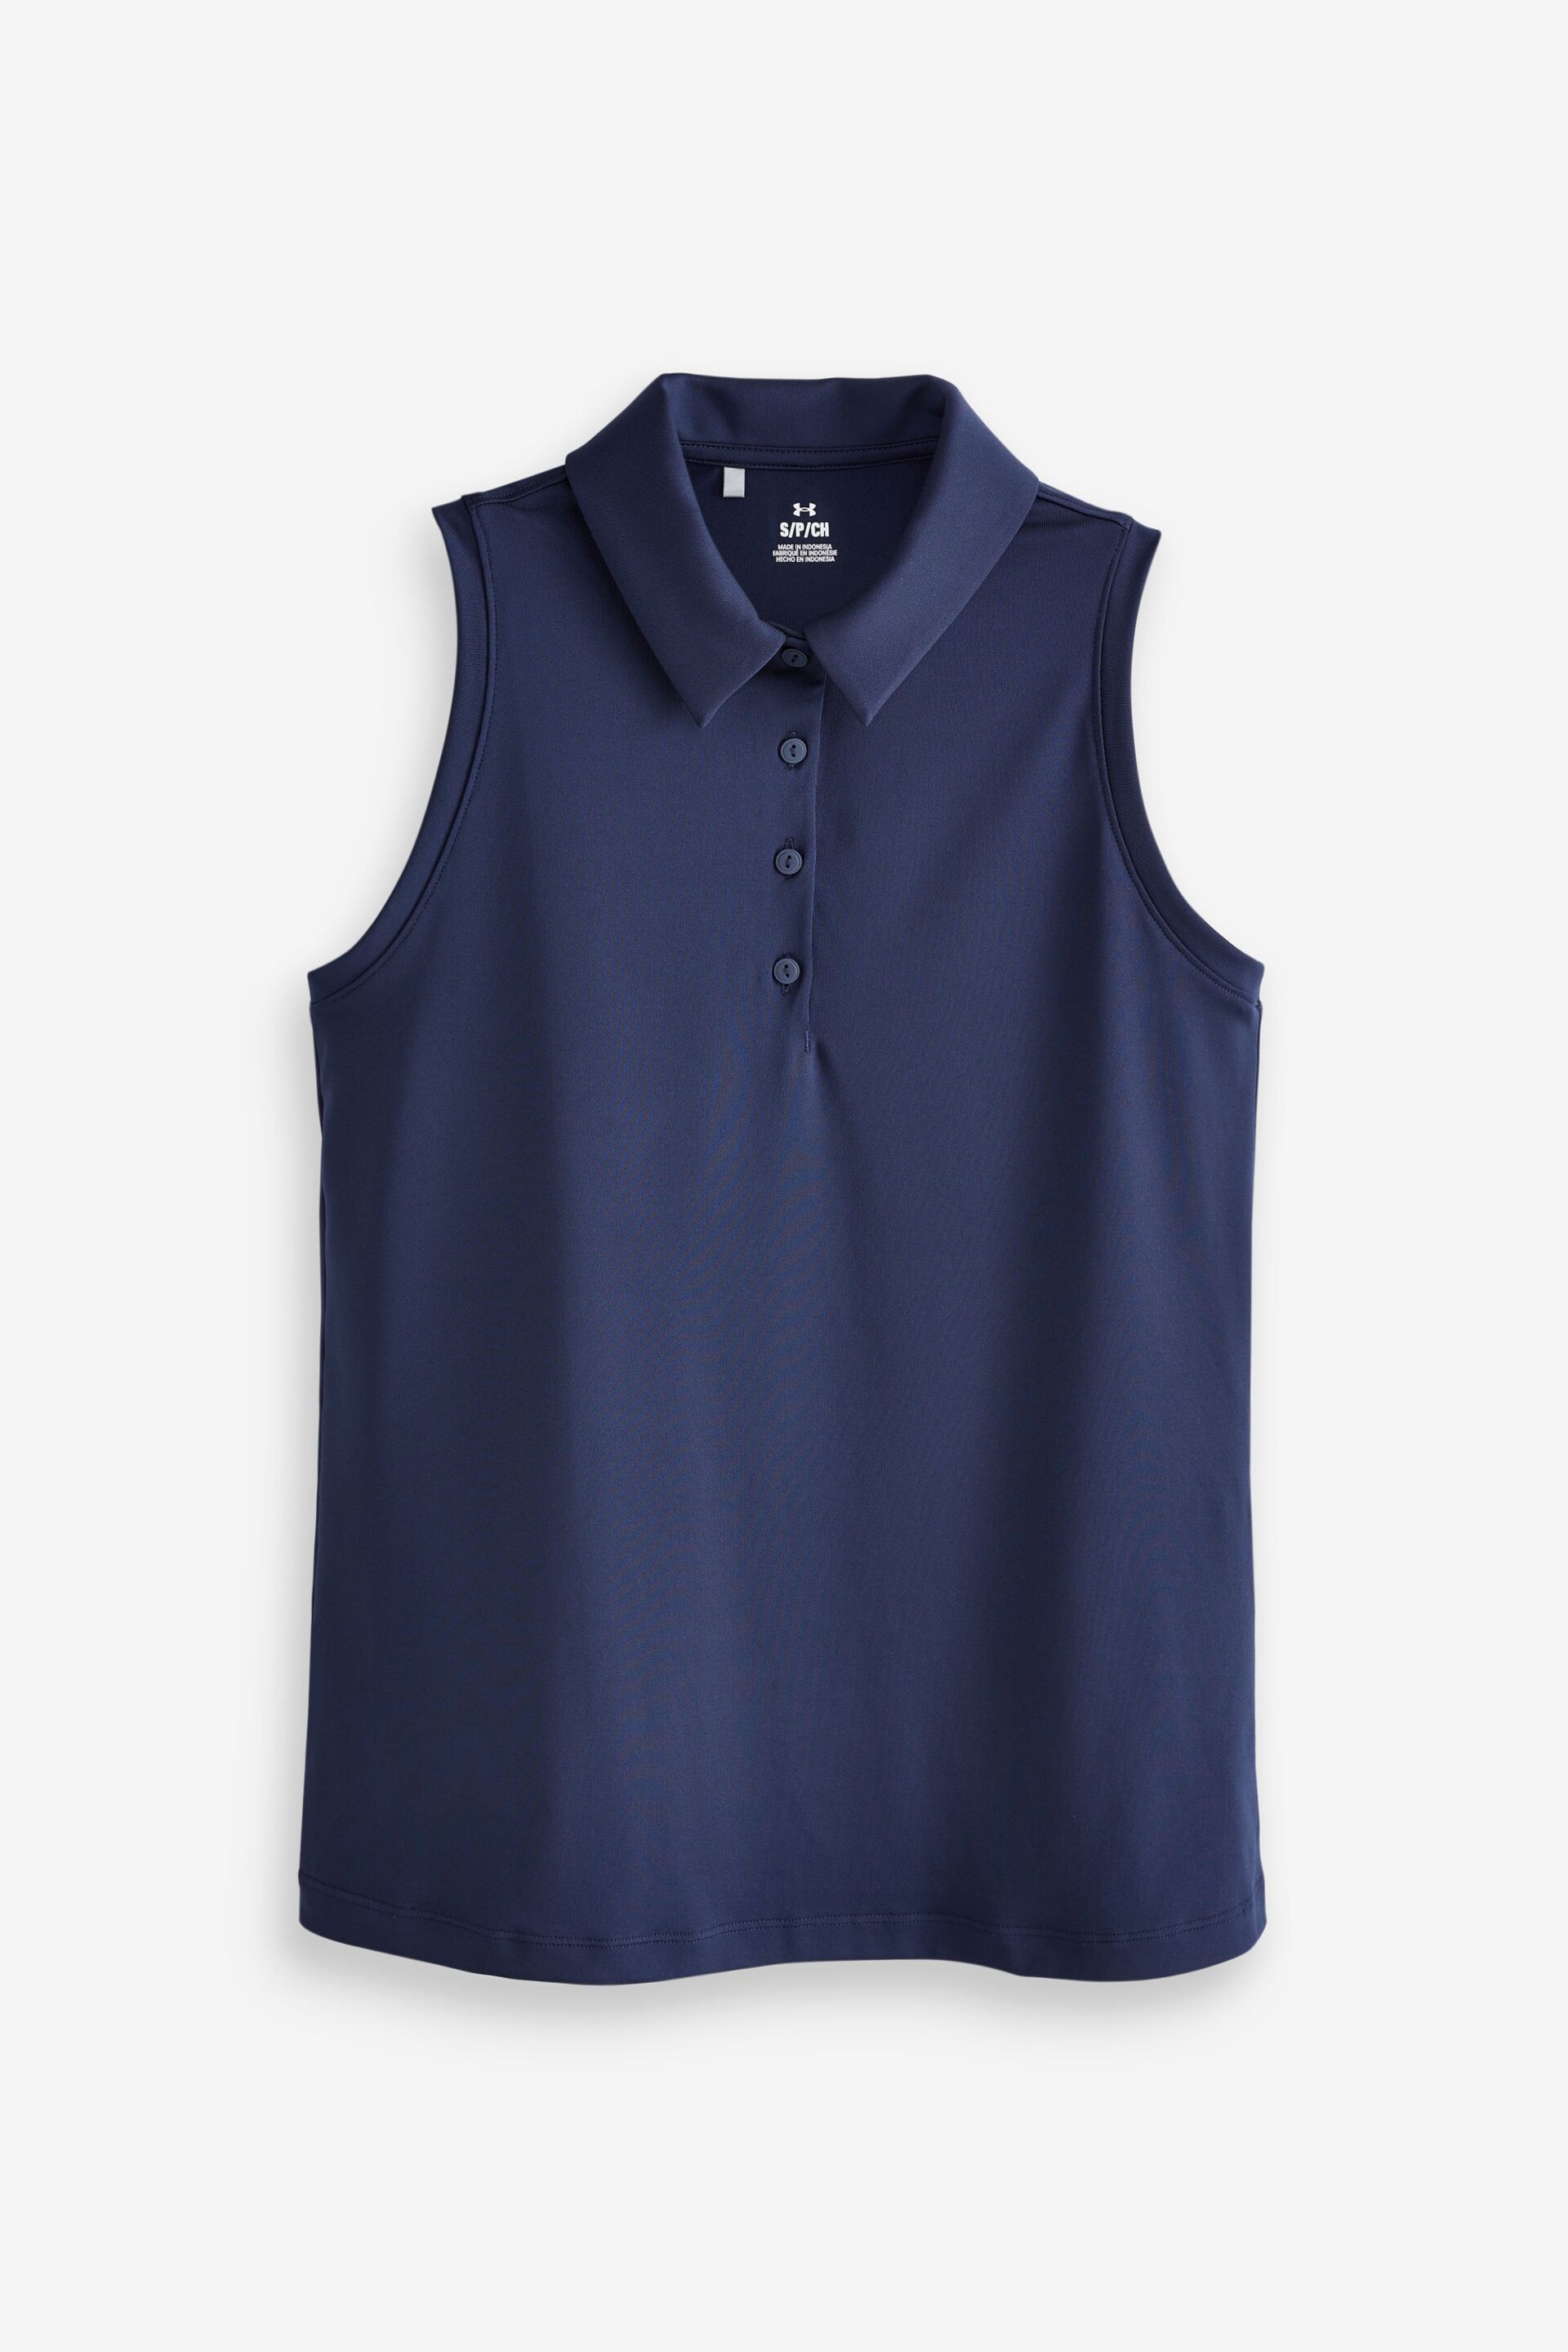 Under Armour Navy Blue/Grey Play Off Polo Shirt - Image 3 of 3